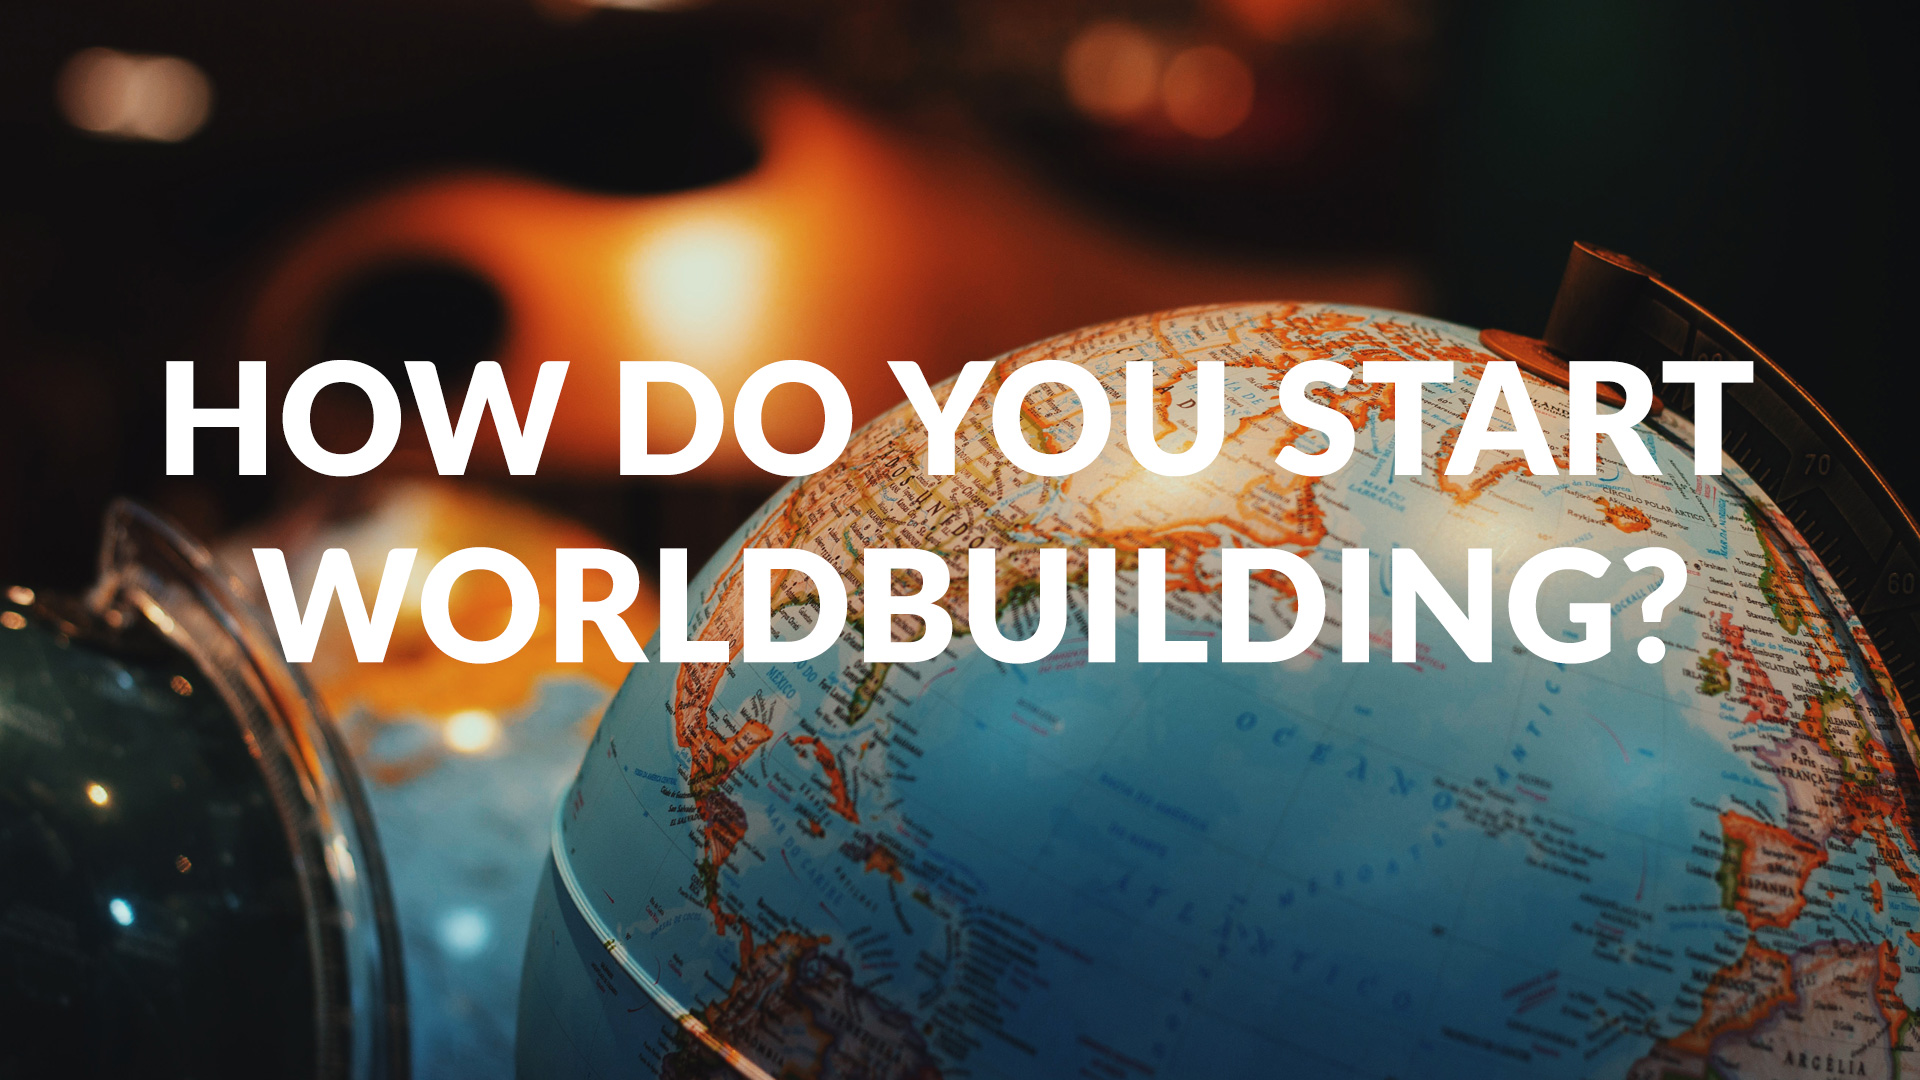 An image of a map showing the text “how do you start world building”